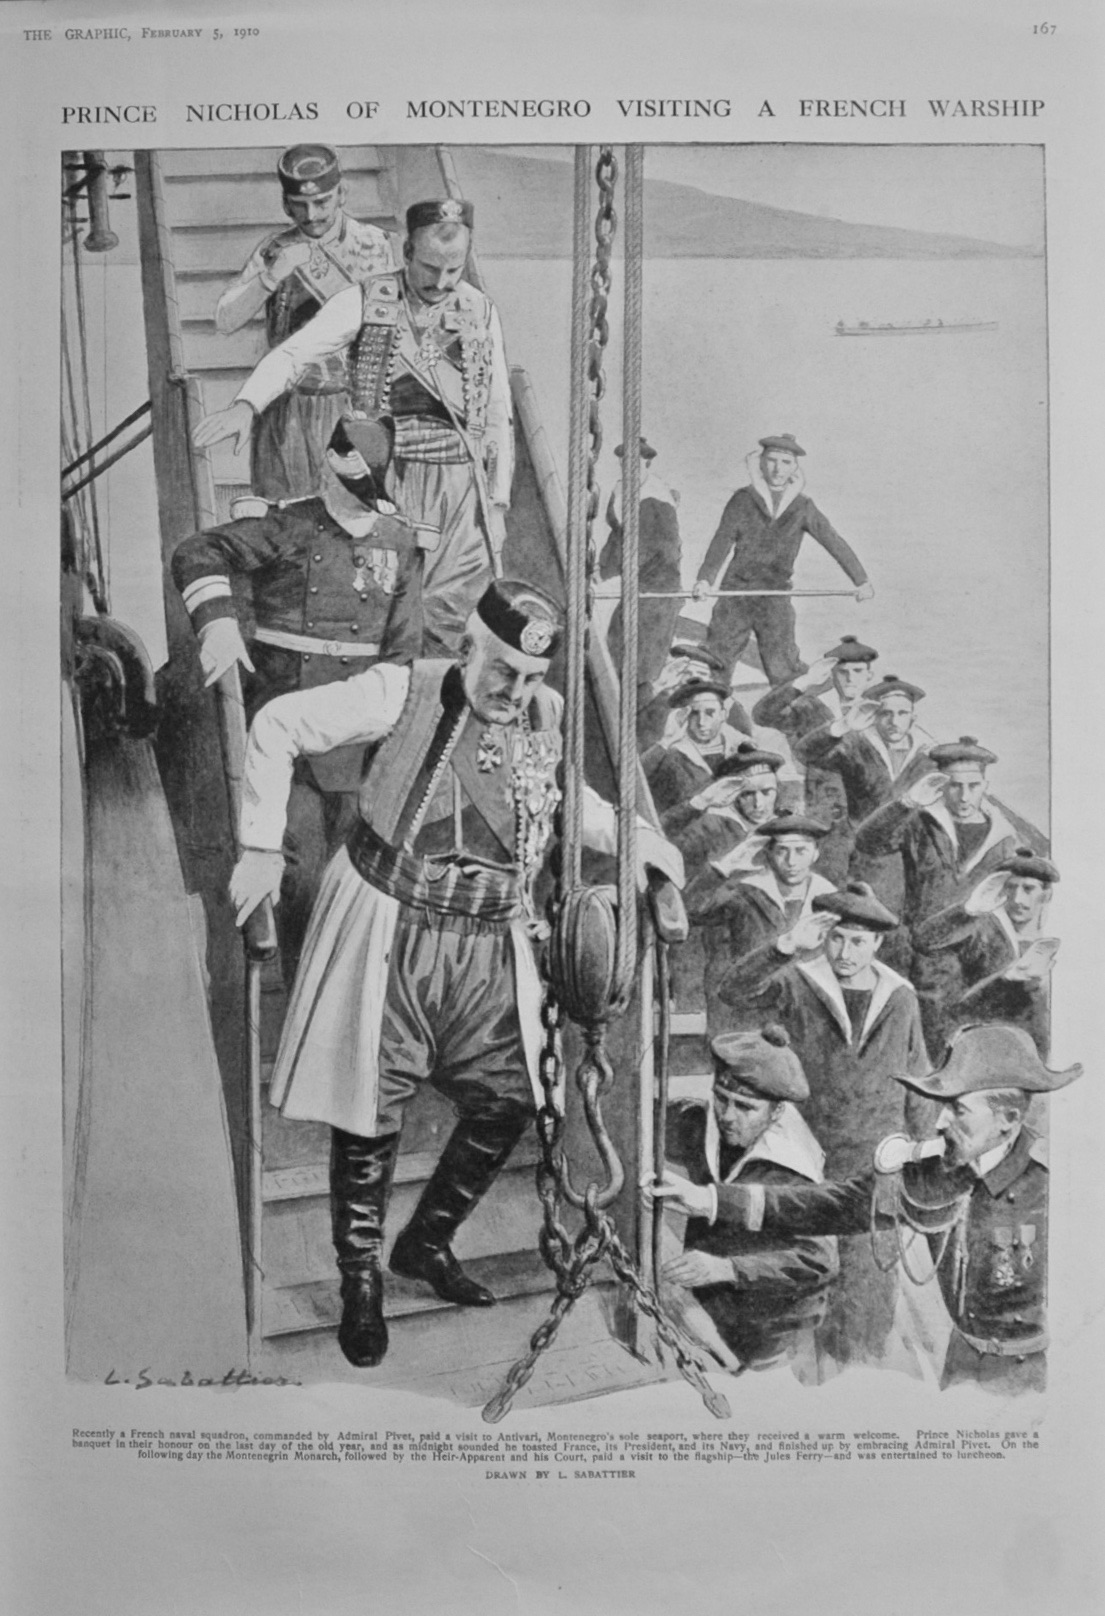 Prince Nicholas of Montenegro visiting a French Warship - 1910